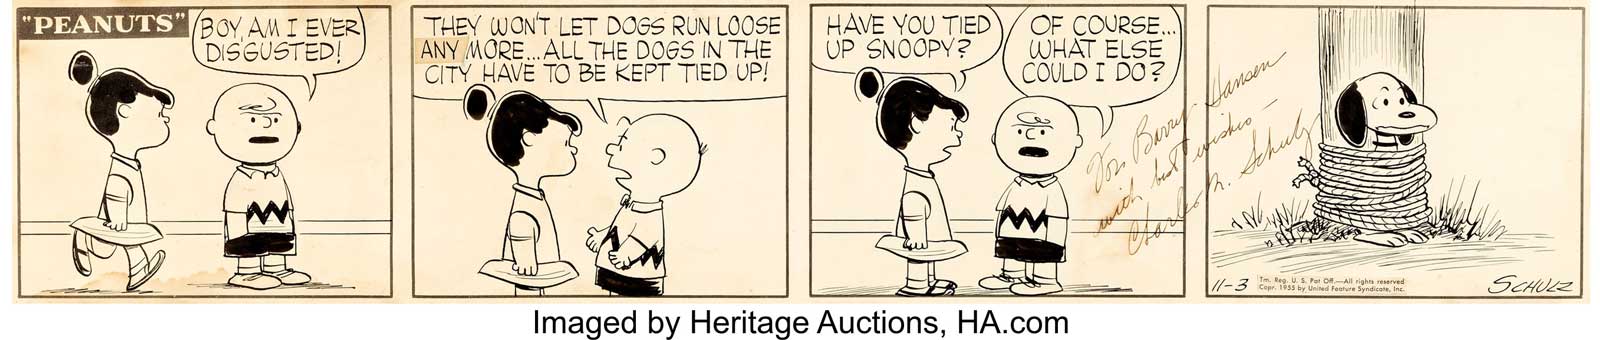 Charles Schulz Peanuts Daily Comic Strip Charlie Brown and Snoopy Original Art dated 3rd November 1955 (United Feature Syndicate, 1955). From early in the strip's 50-year run. This piece was owned by Barry Hansen (aka Doctor Demento, host of the longtime radio show) since his childhood.